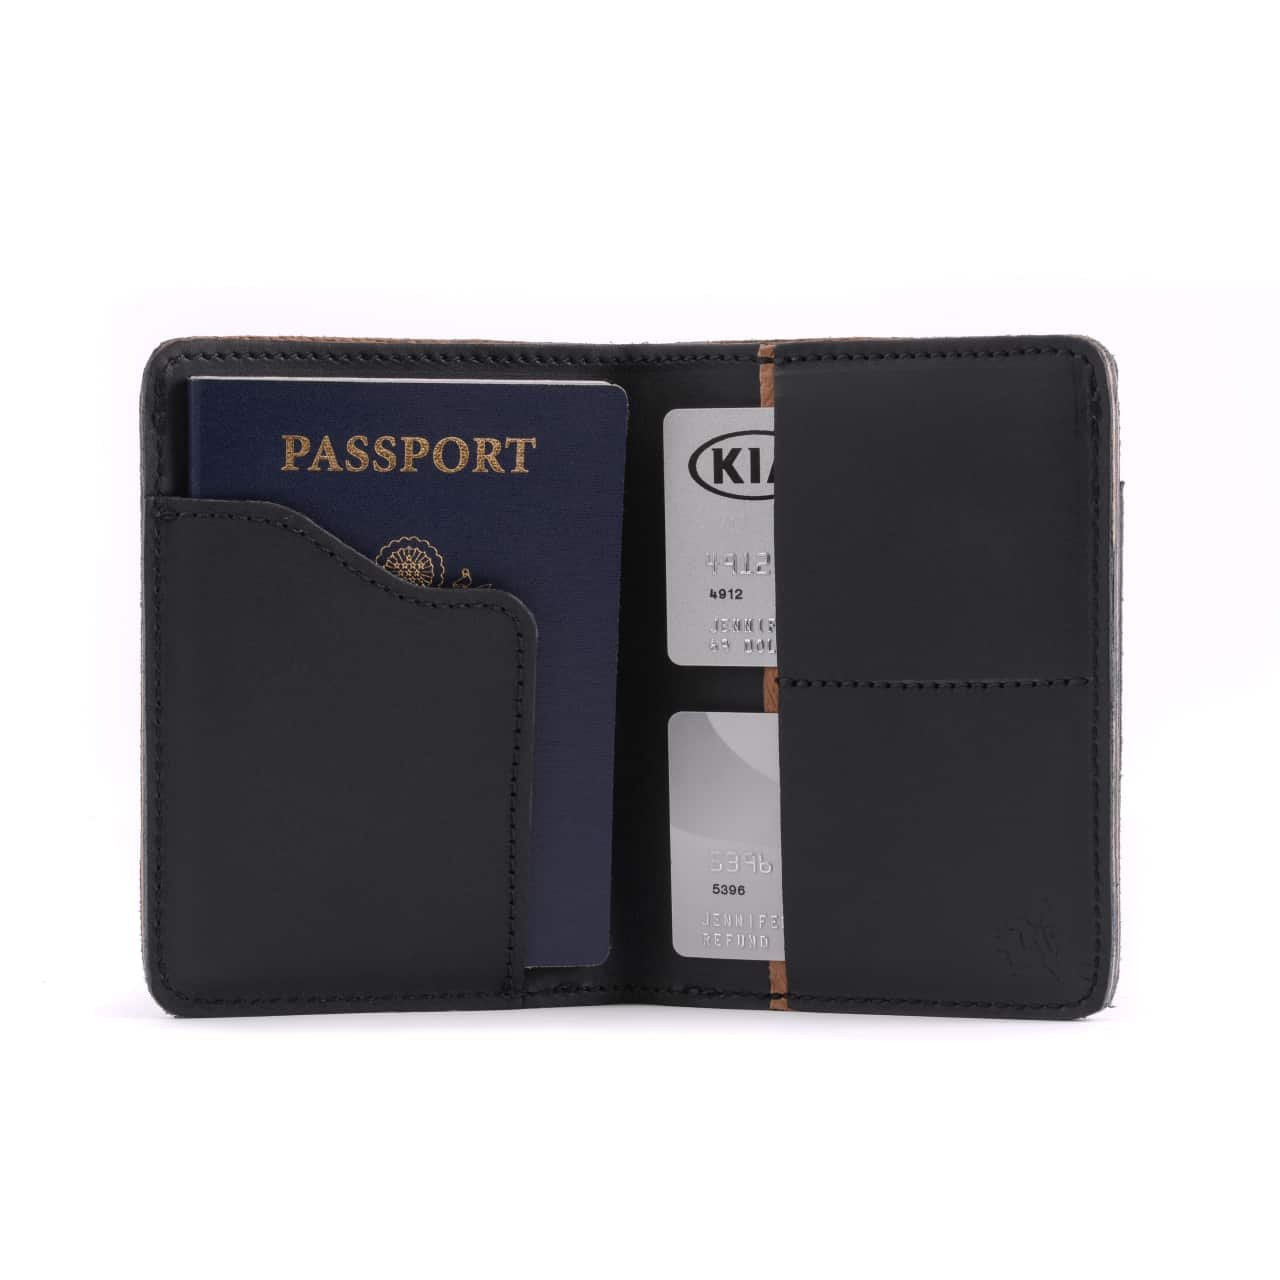 The Best Travel Wallets to Organize Your Vacation Essentials (2021)